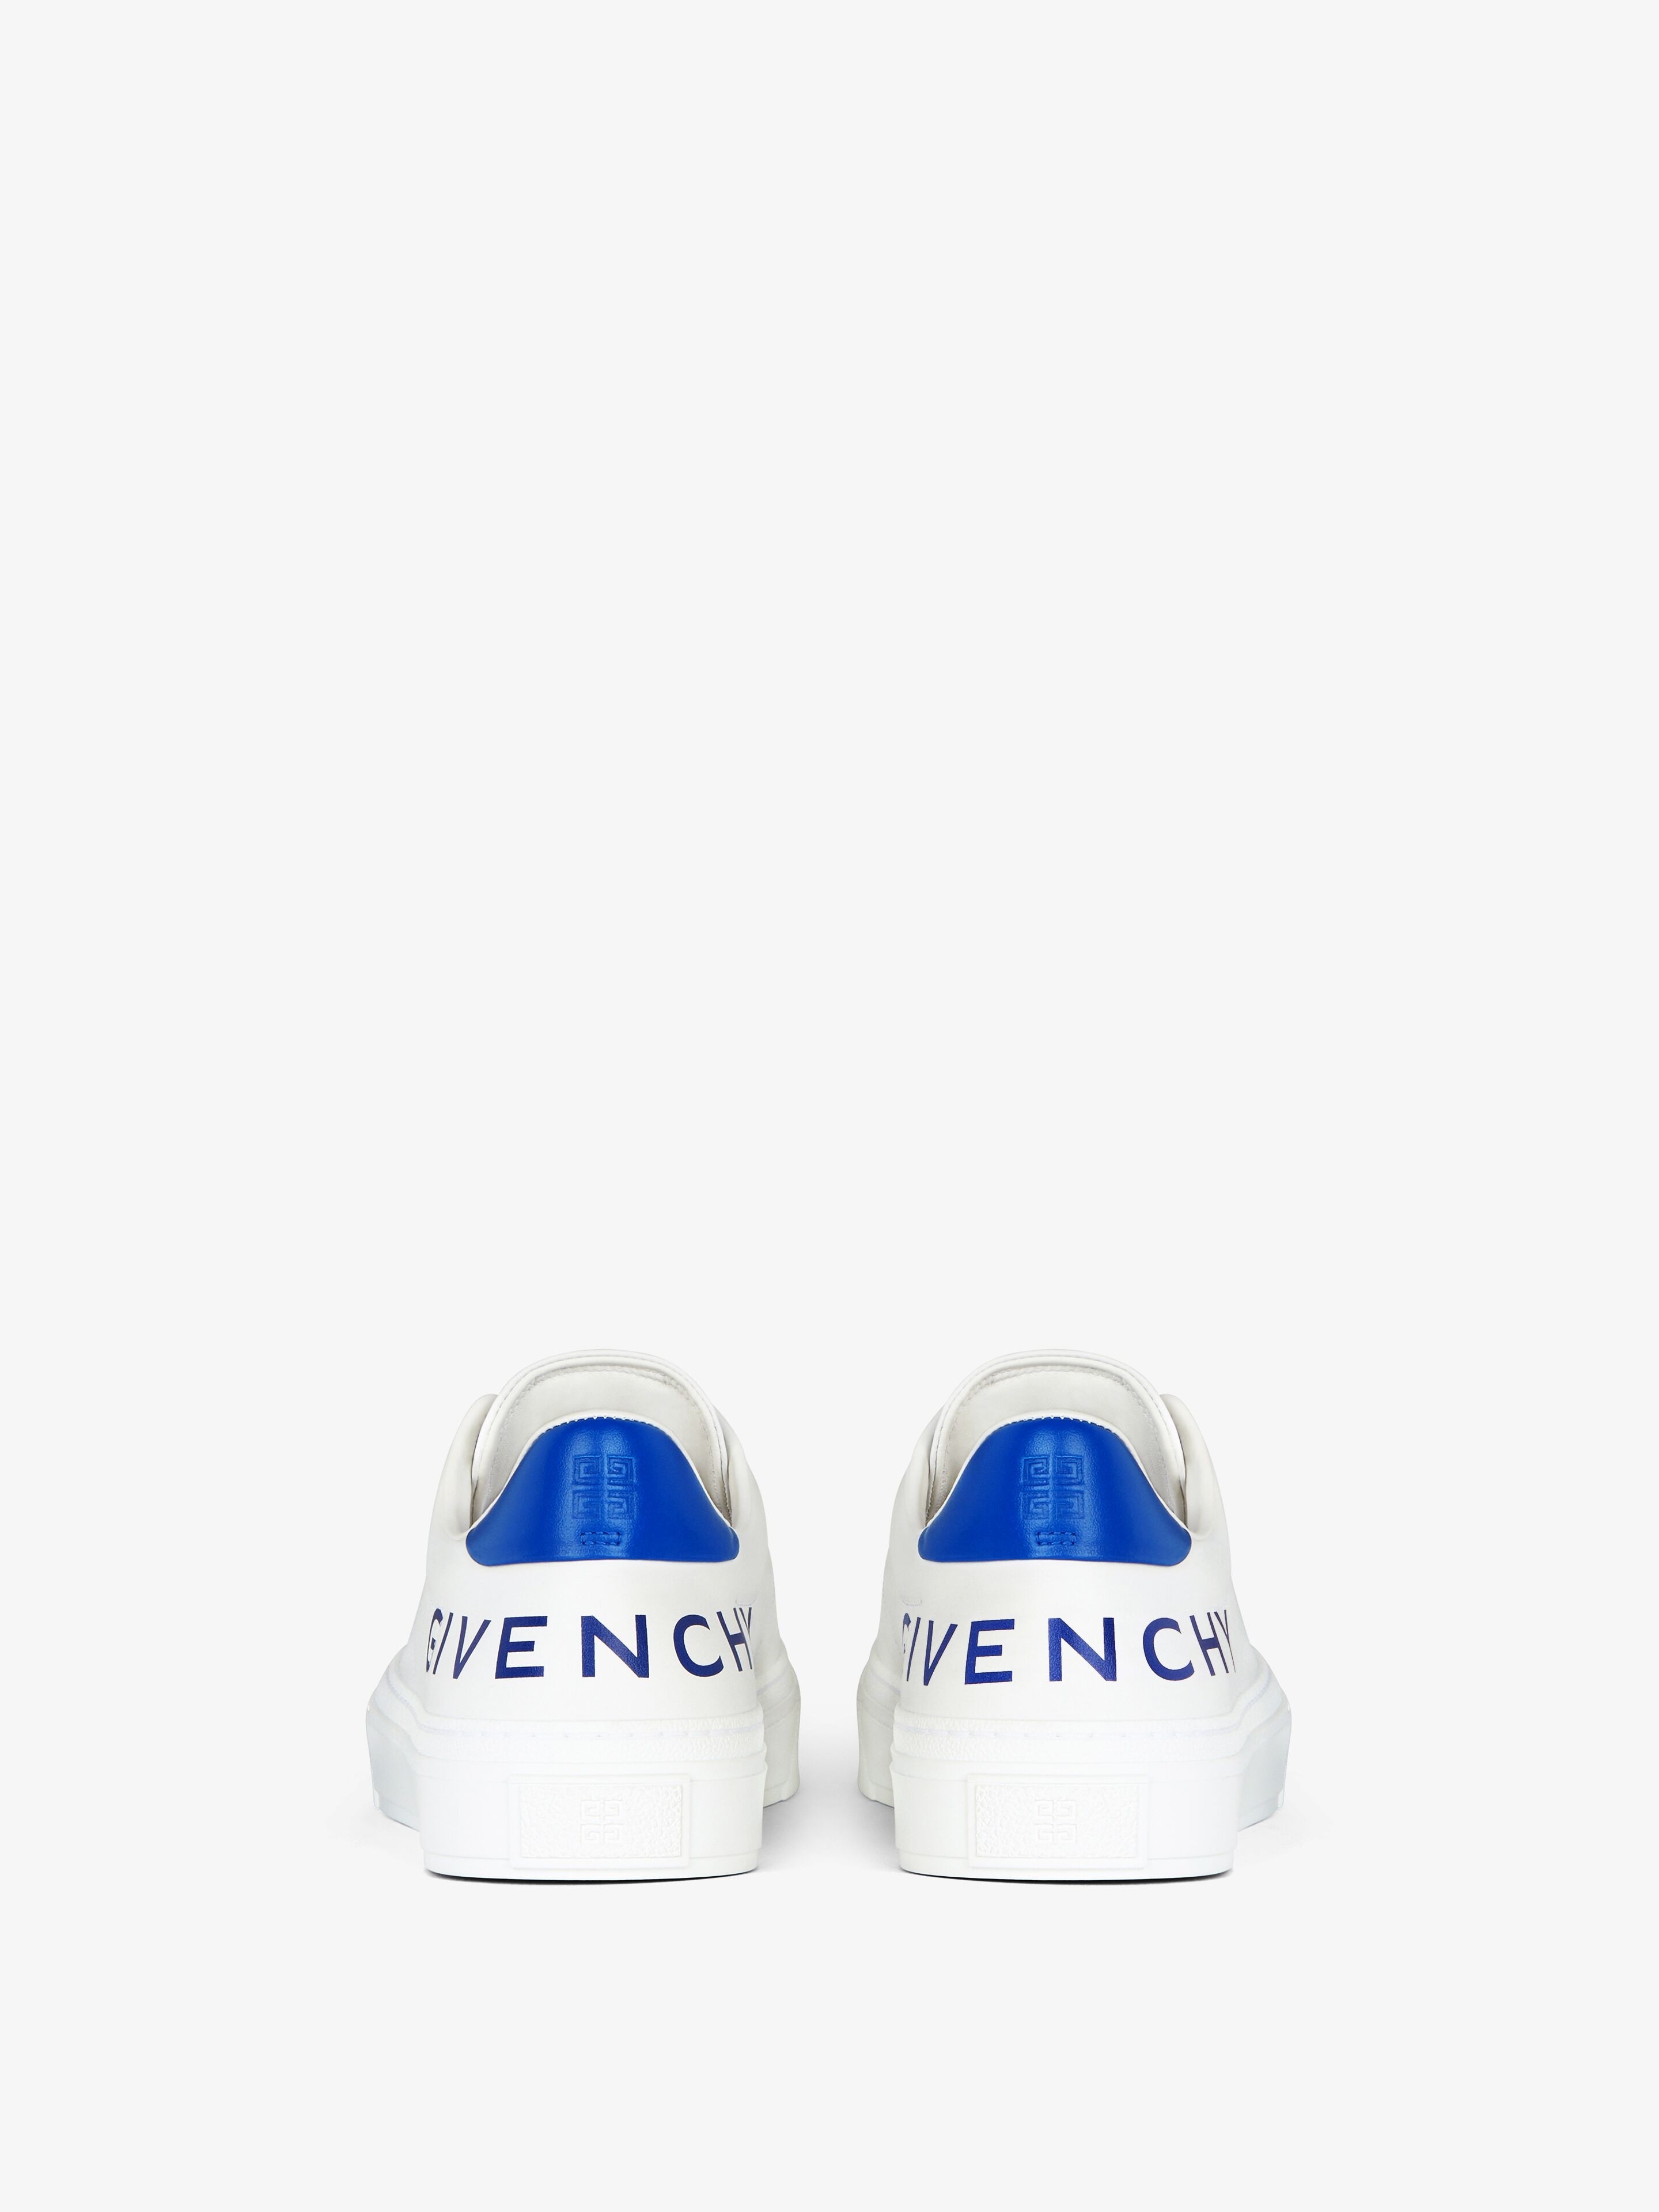 GIVENCHY CITY SPORT SNEAKERS IN LEATHER - 7